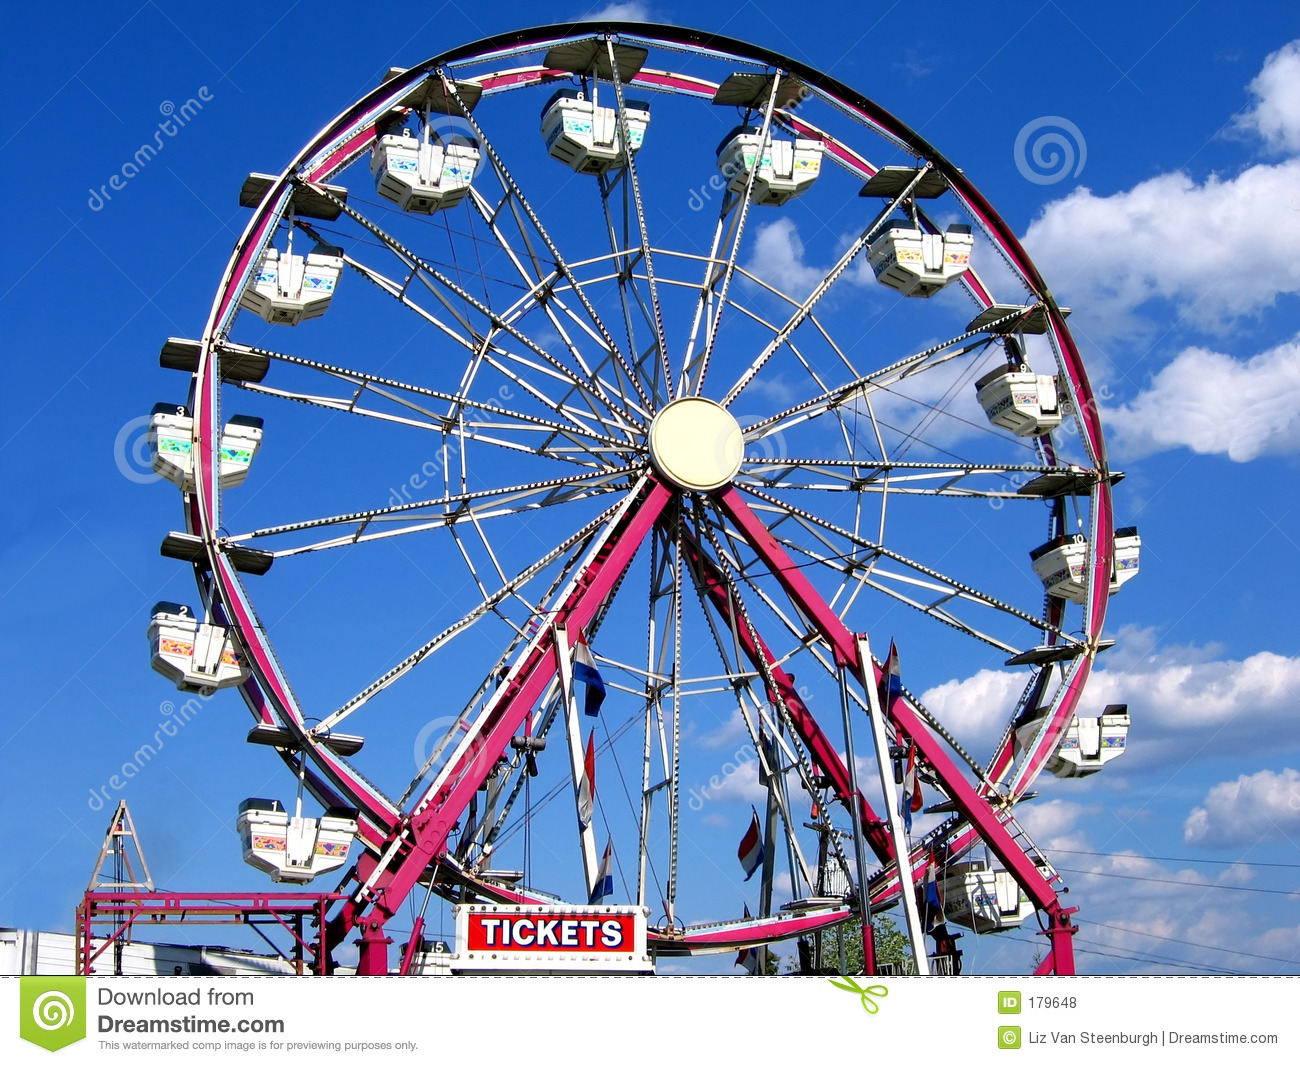 Amazing Ferris Wheel Pictures & Backgrounds